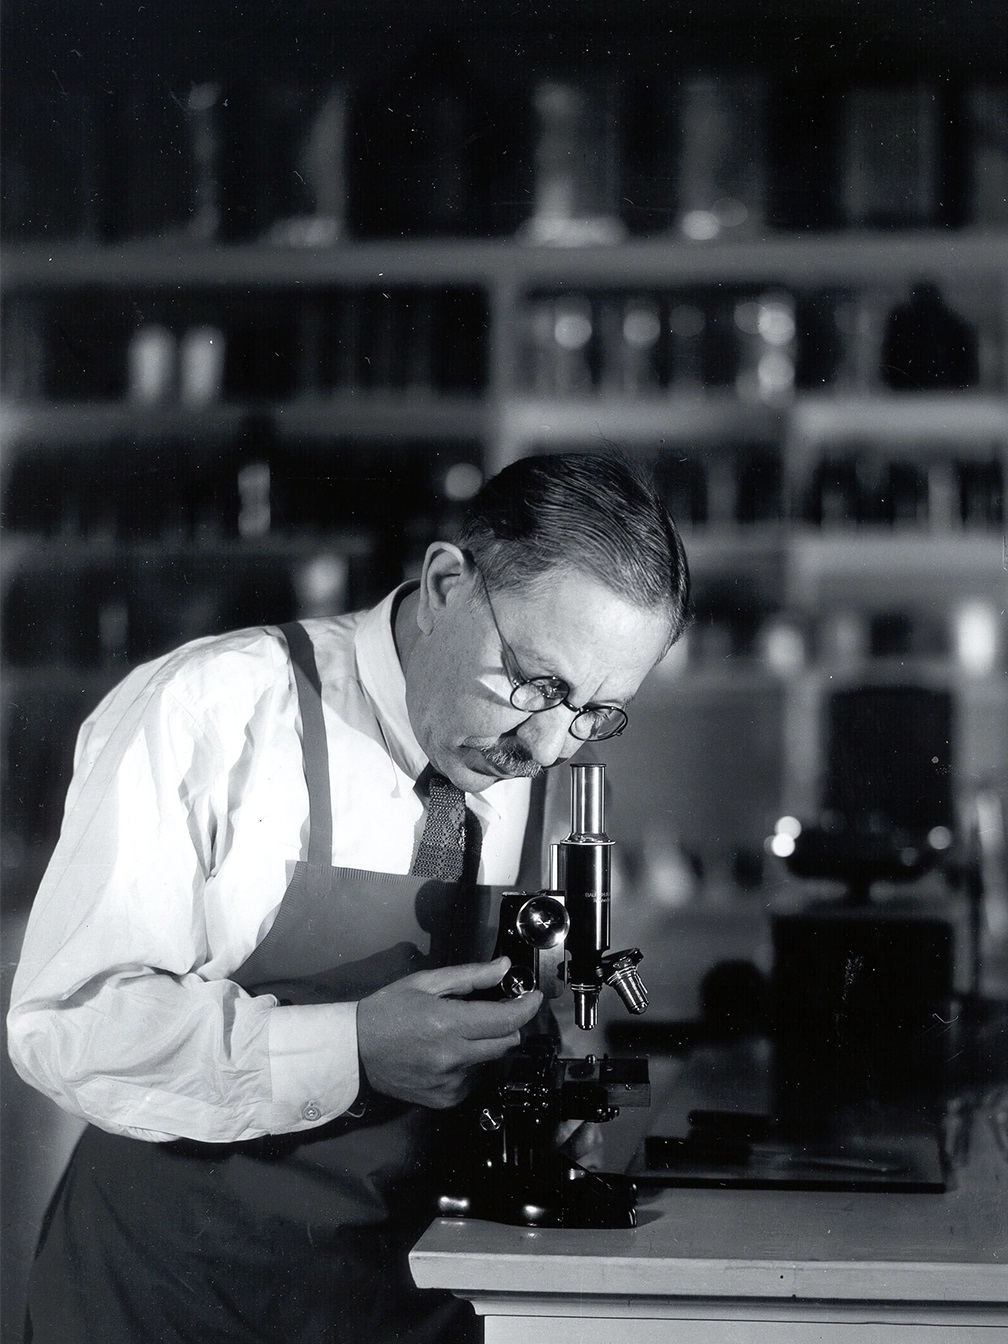 Max Factor working in his lab. from Max Factor official site www.maxfactor.com